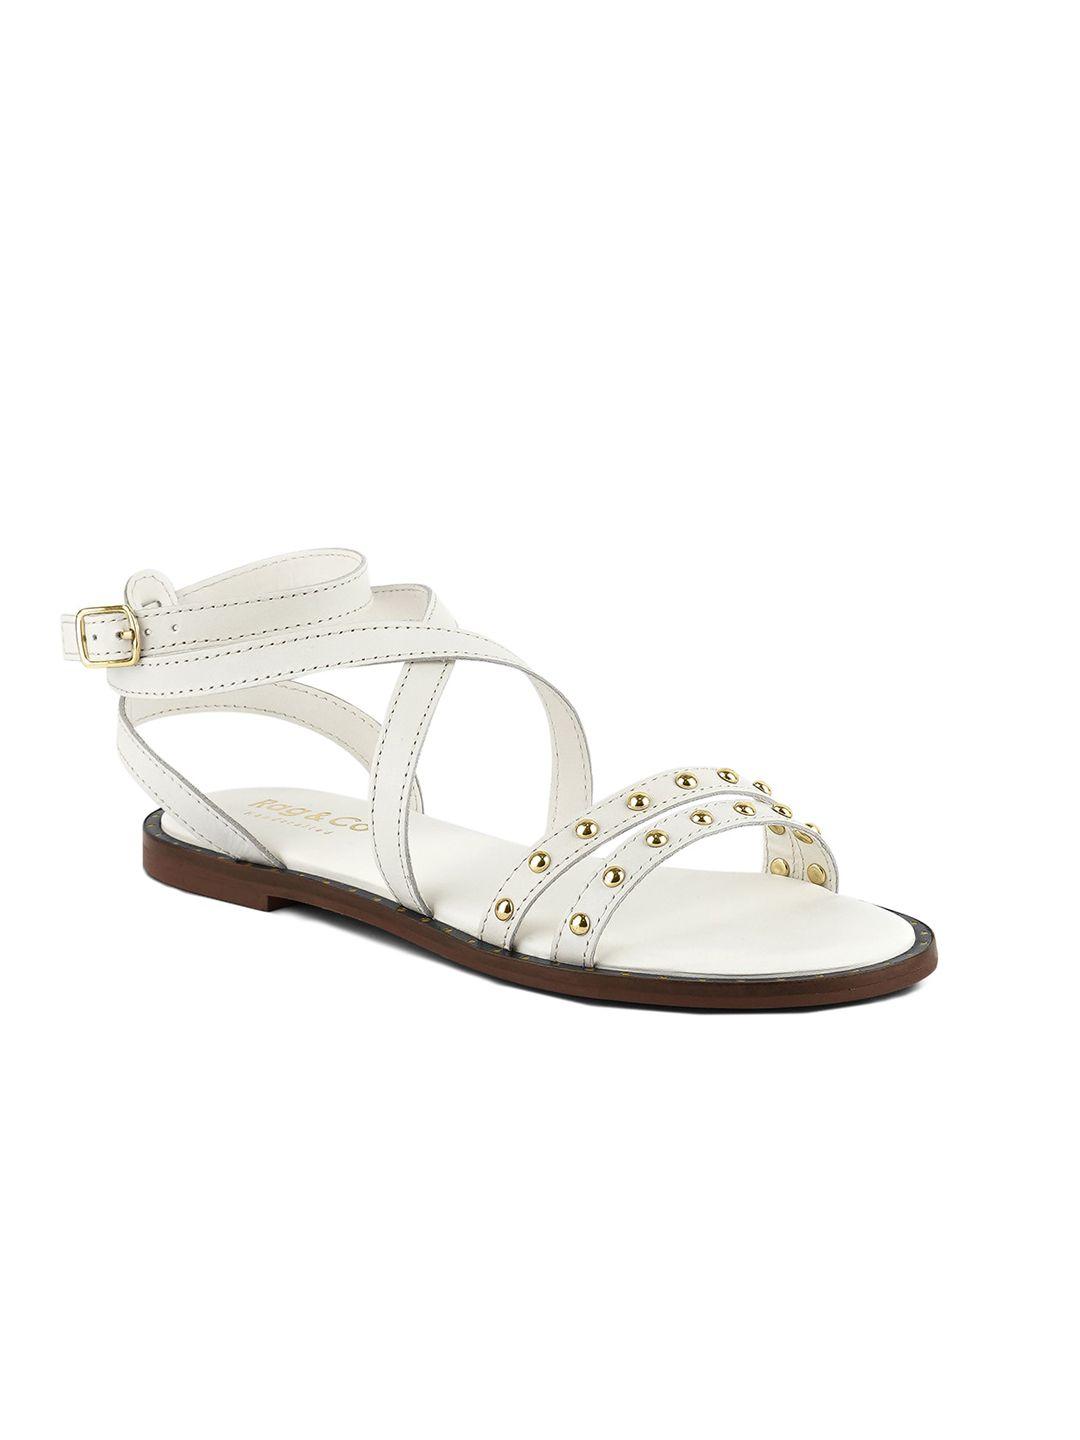 rag & co women embellished strappy leather open toe flats with ankle loop